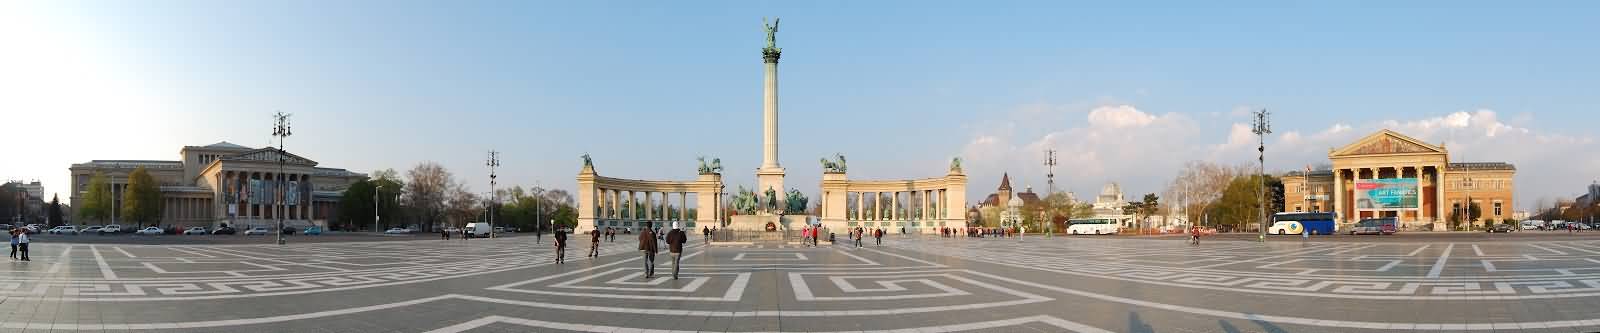 Panorama View Of The Heroes Square